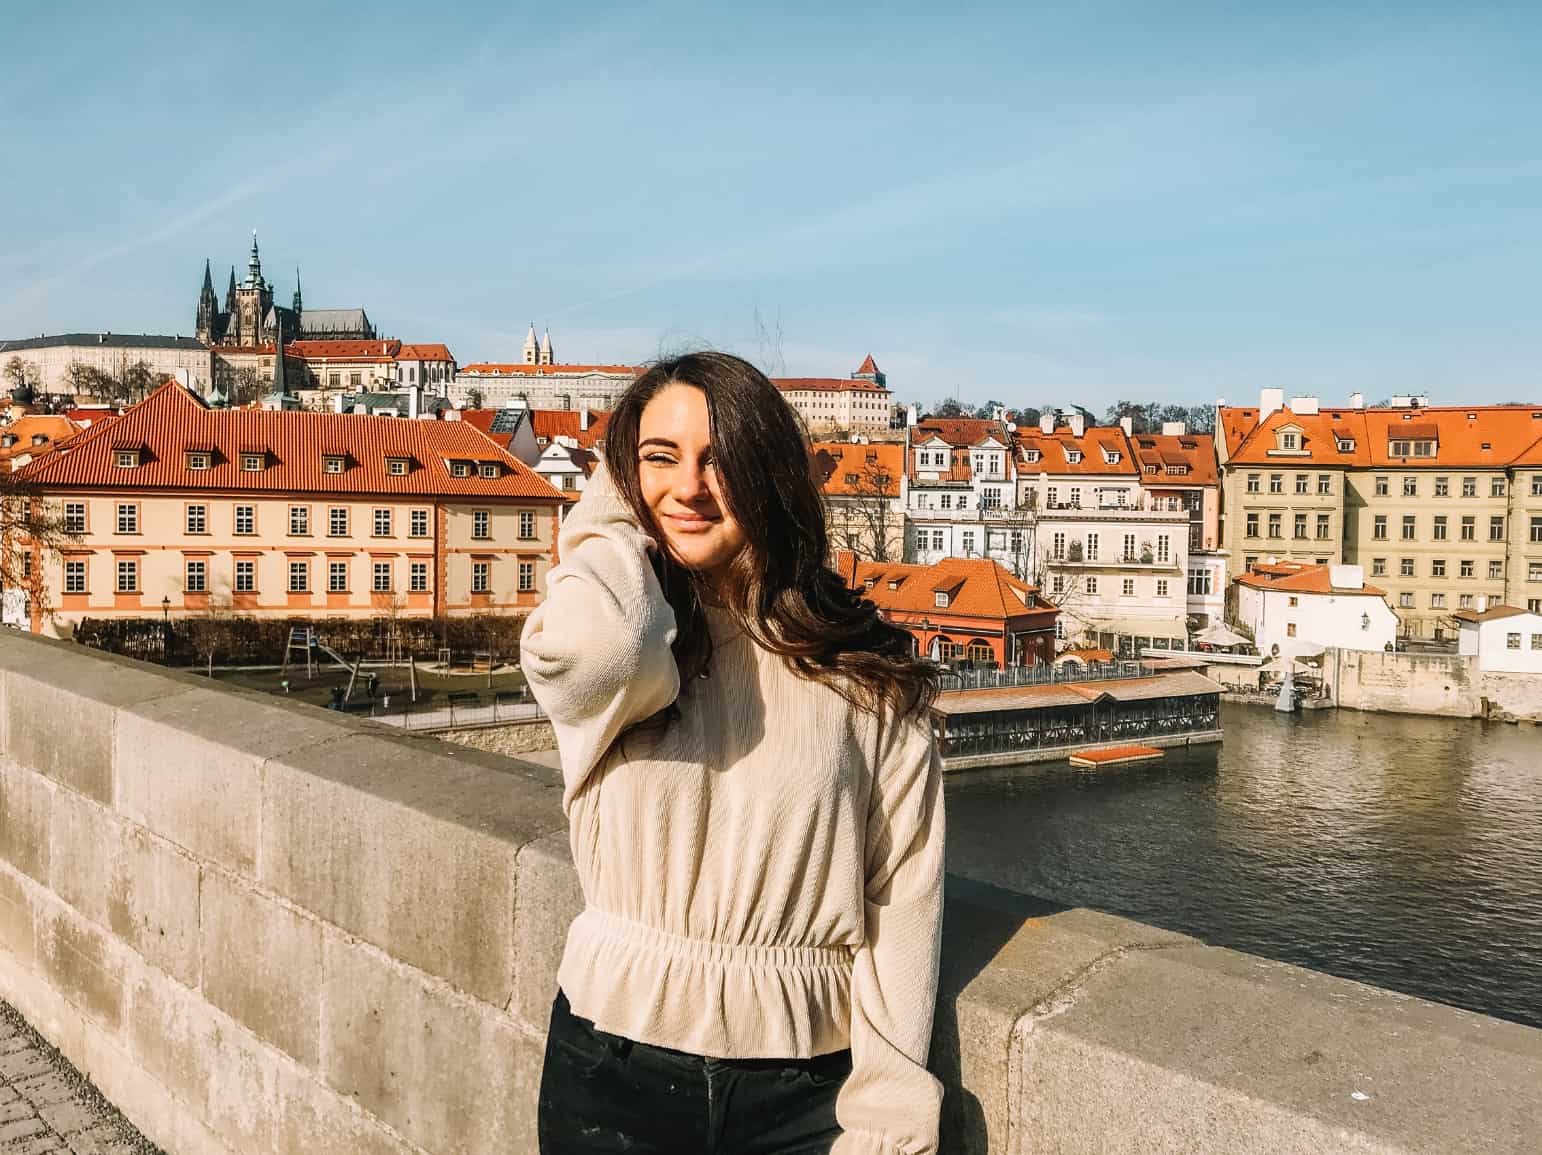 Views from the Charles Bridge in Prague. Walk across this bridge on your 4 days in Prague itinerary!